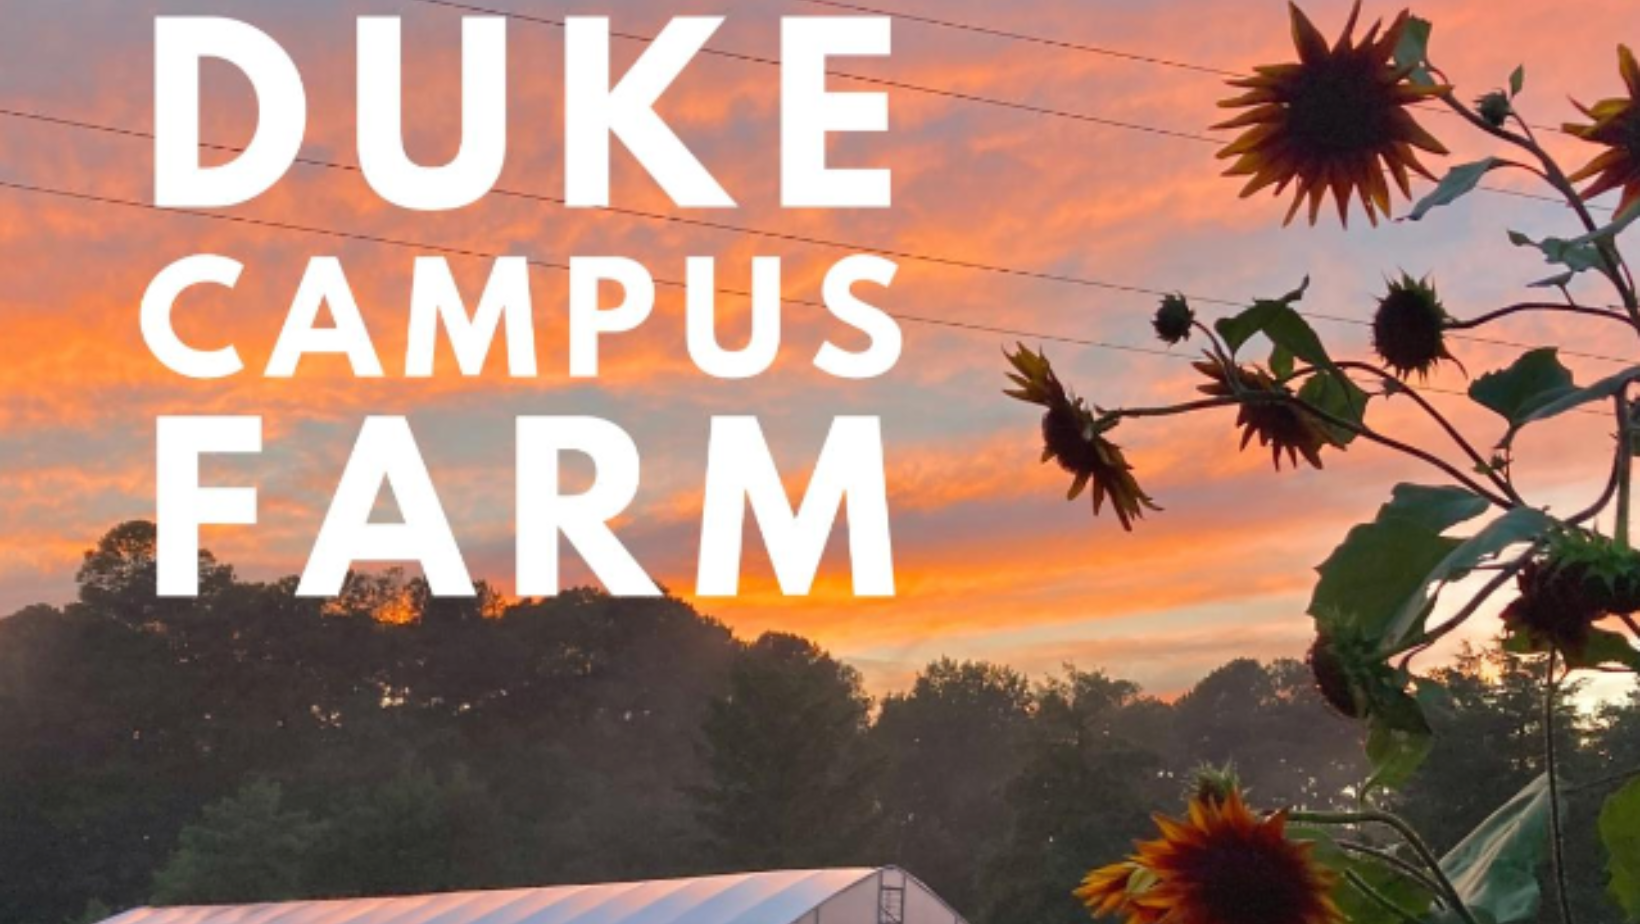 duke campus farm in white letters over a sunset